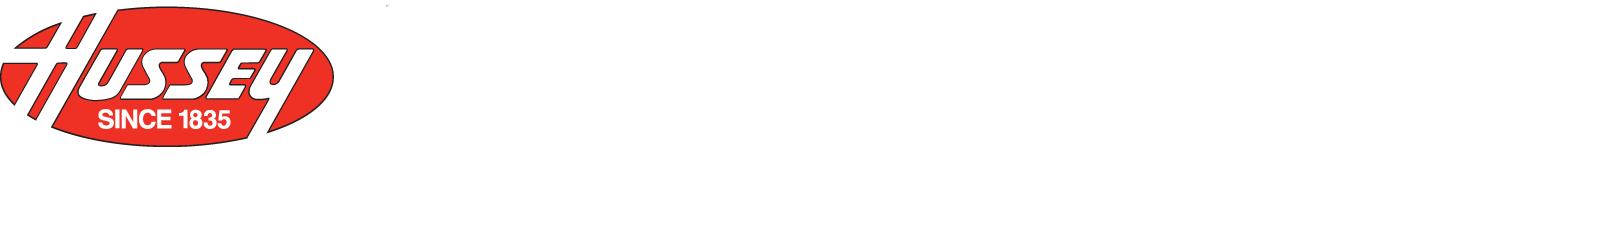 logo for hussey seating